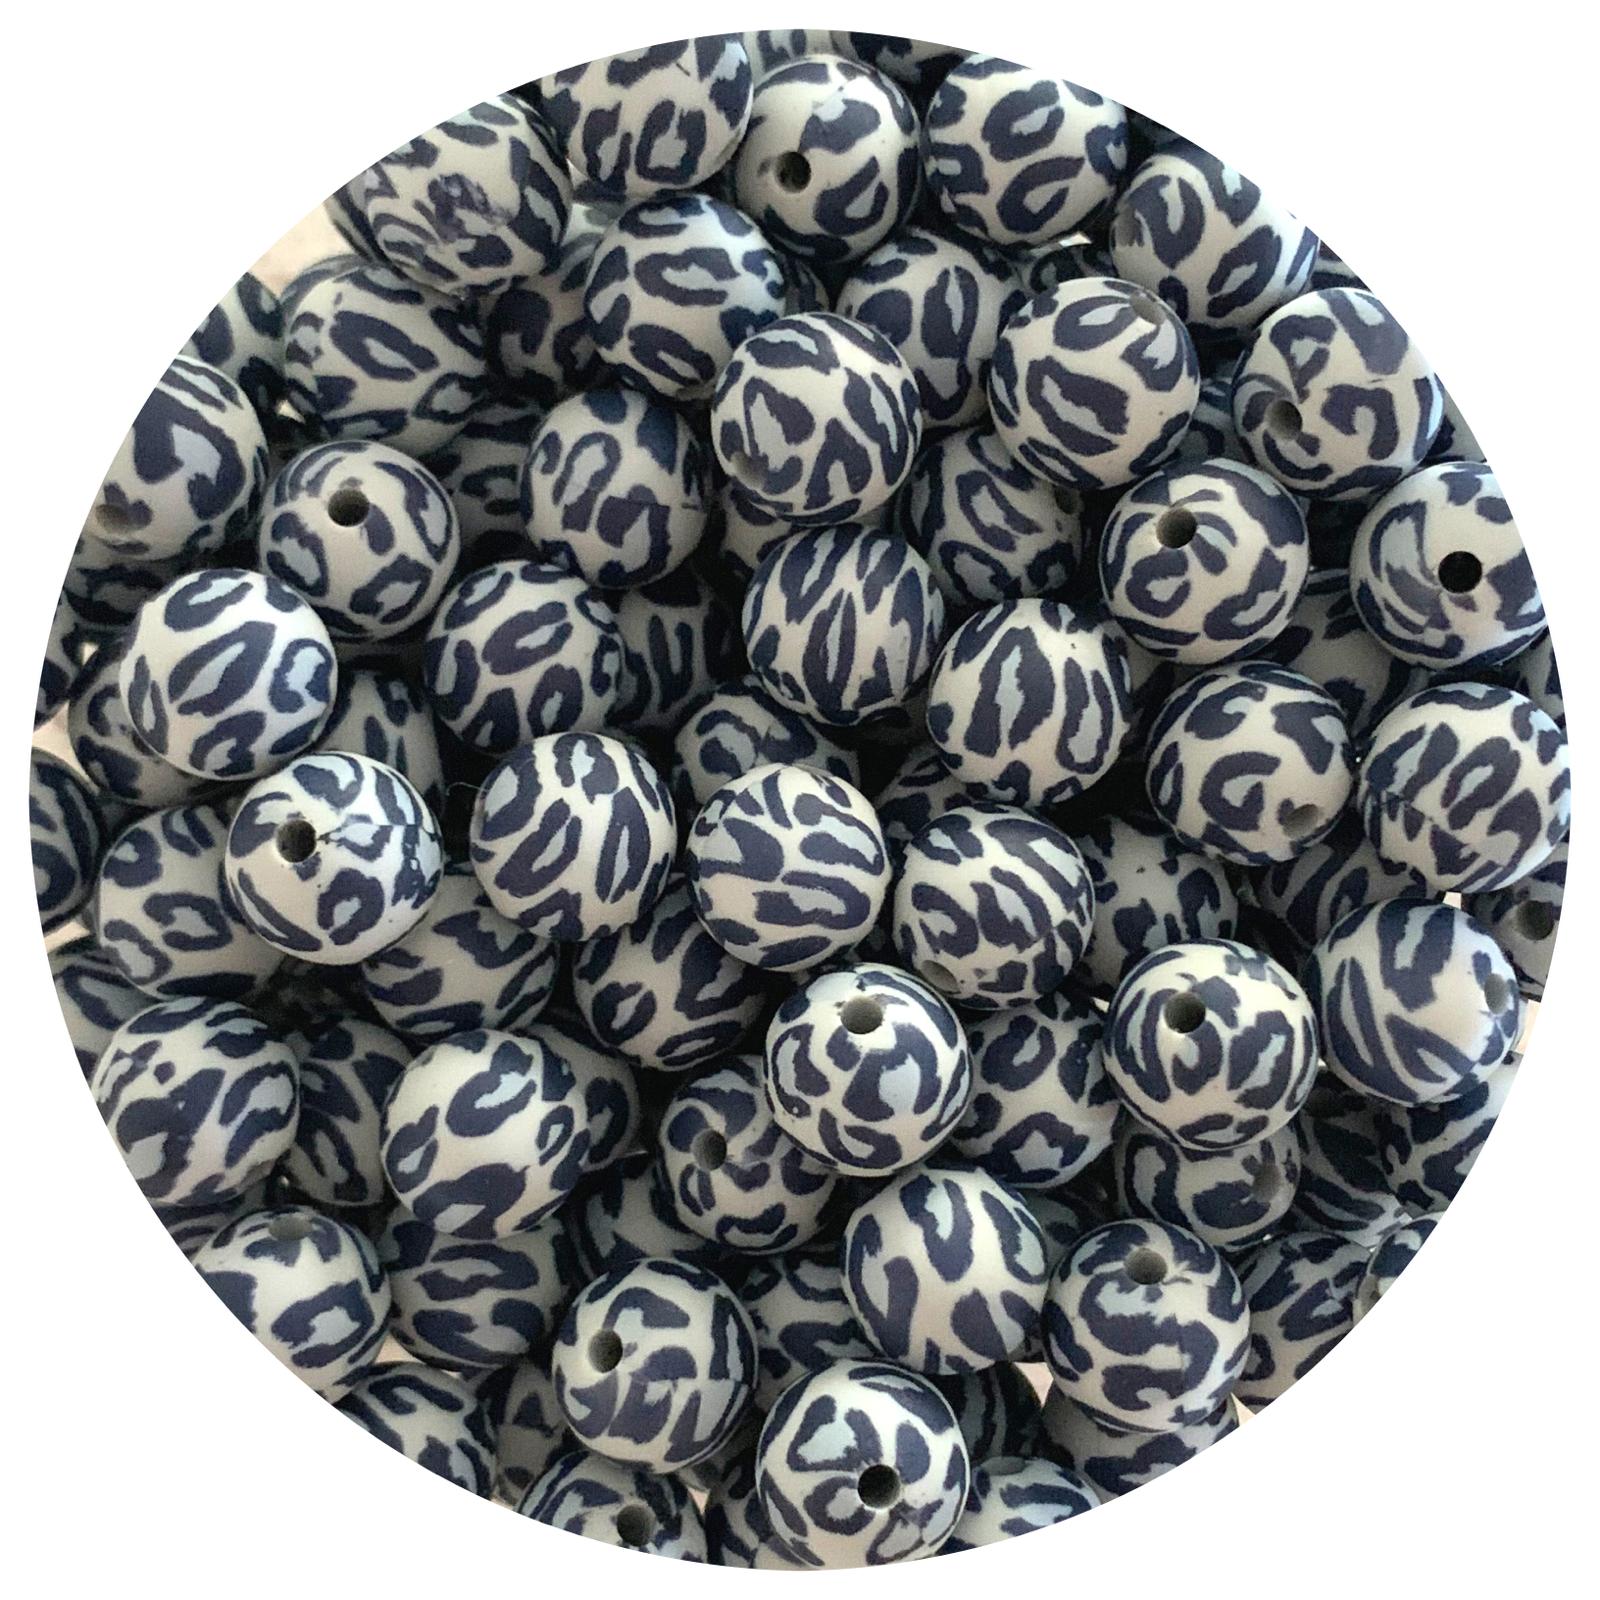 Blue Grey Leopard - 12mm Round Silicone Beads - 10 beads